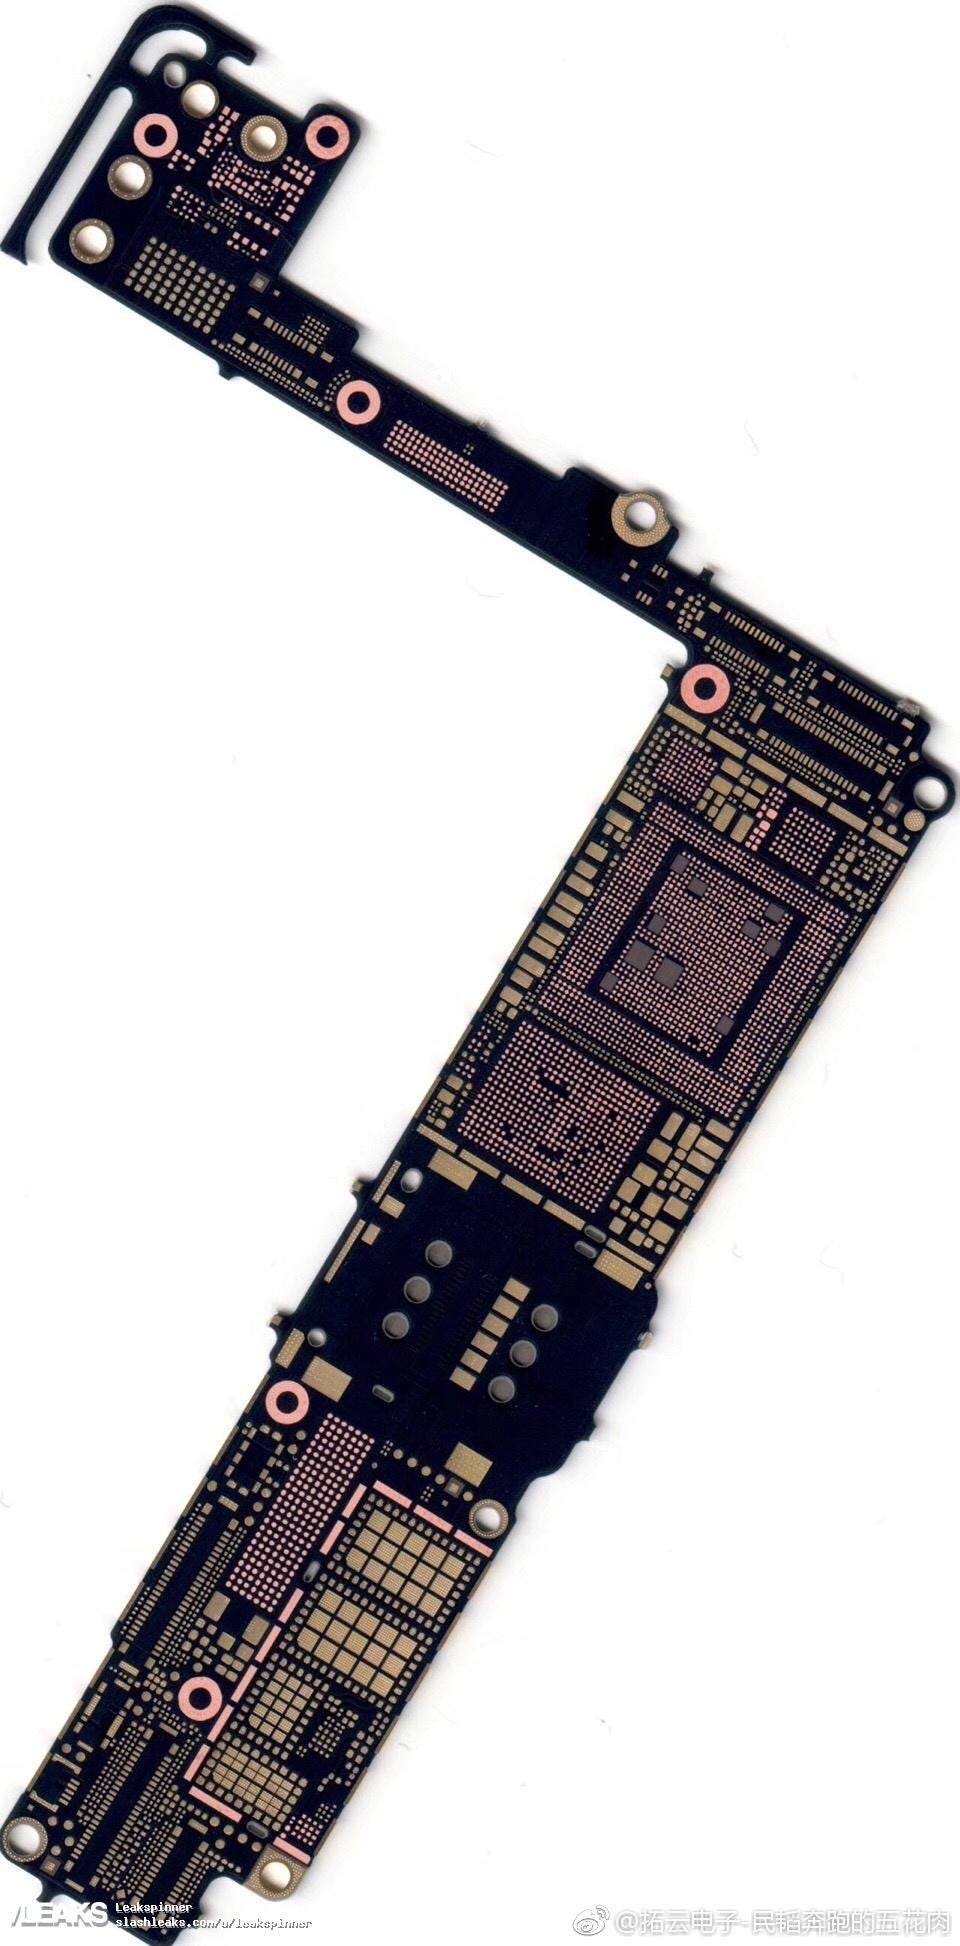 The iPhone 7s logic board also appeared on Weibo - iPhone 7s Plus bare logic board poses for the camera, A11 chip and Intel modem markings observed